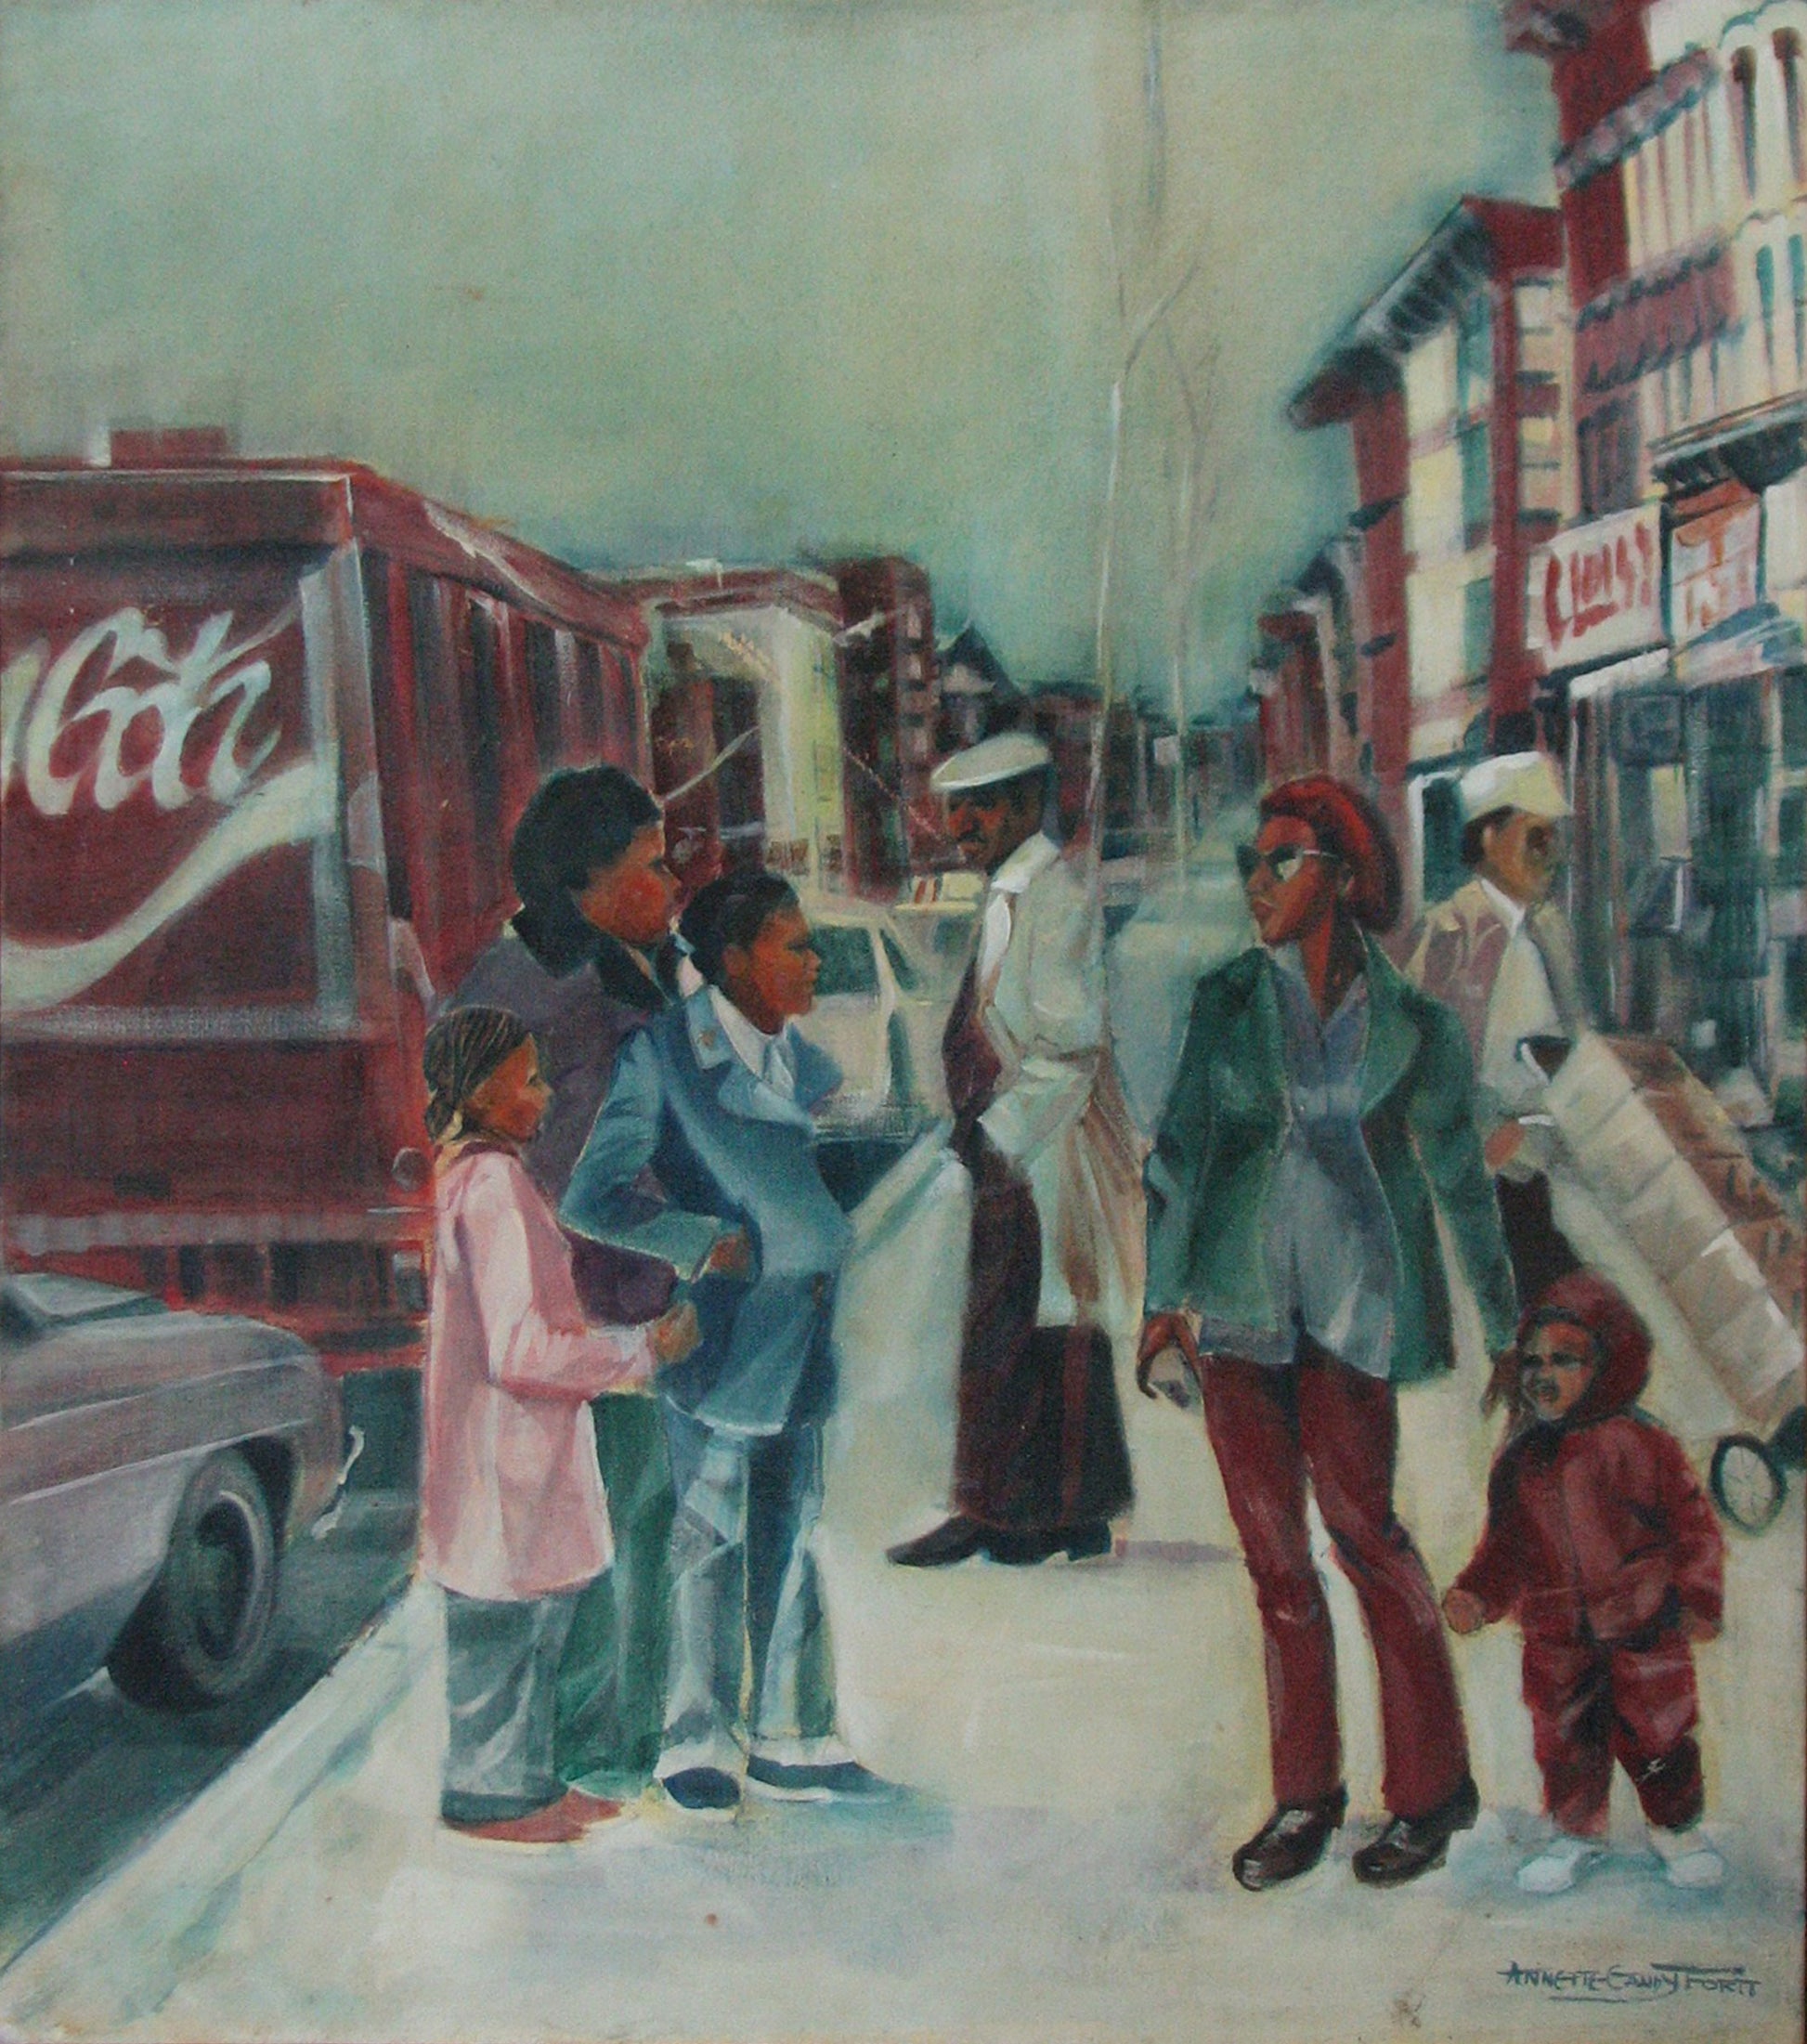 These candid shot paintings depict scenes that we all can relate to. They preserve scenes of Brooklyn in the 80's bringing back memories or history, whichever is your point of departure.